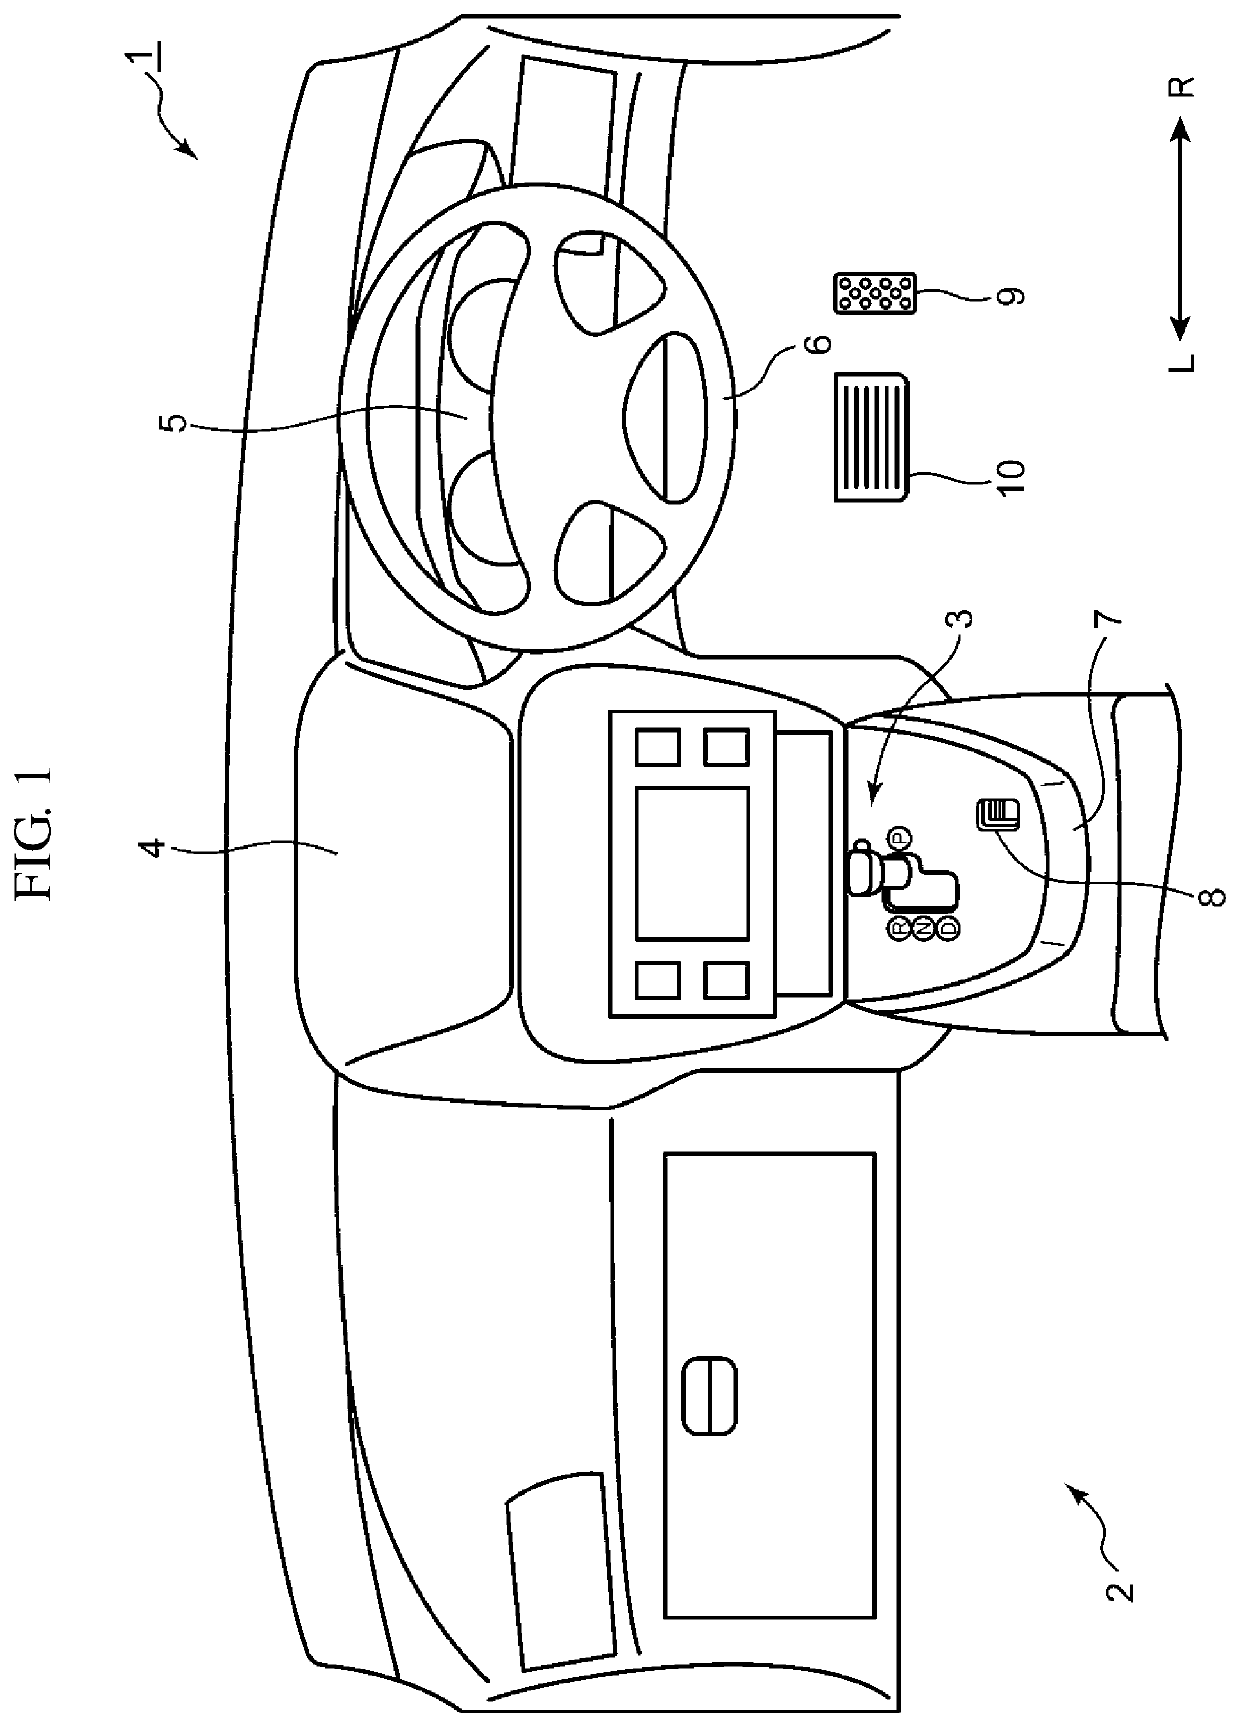 Vehicle shifter device